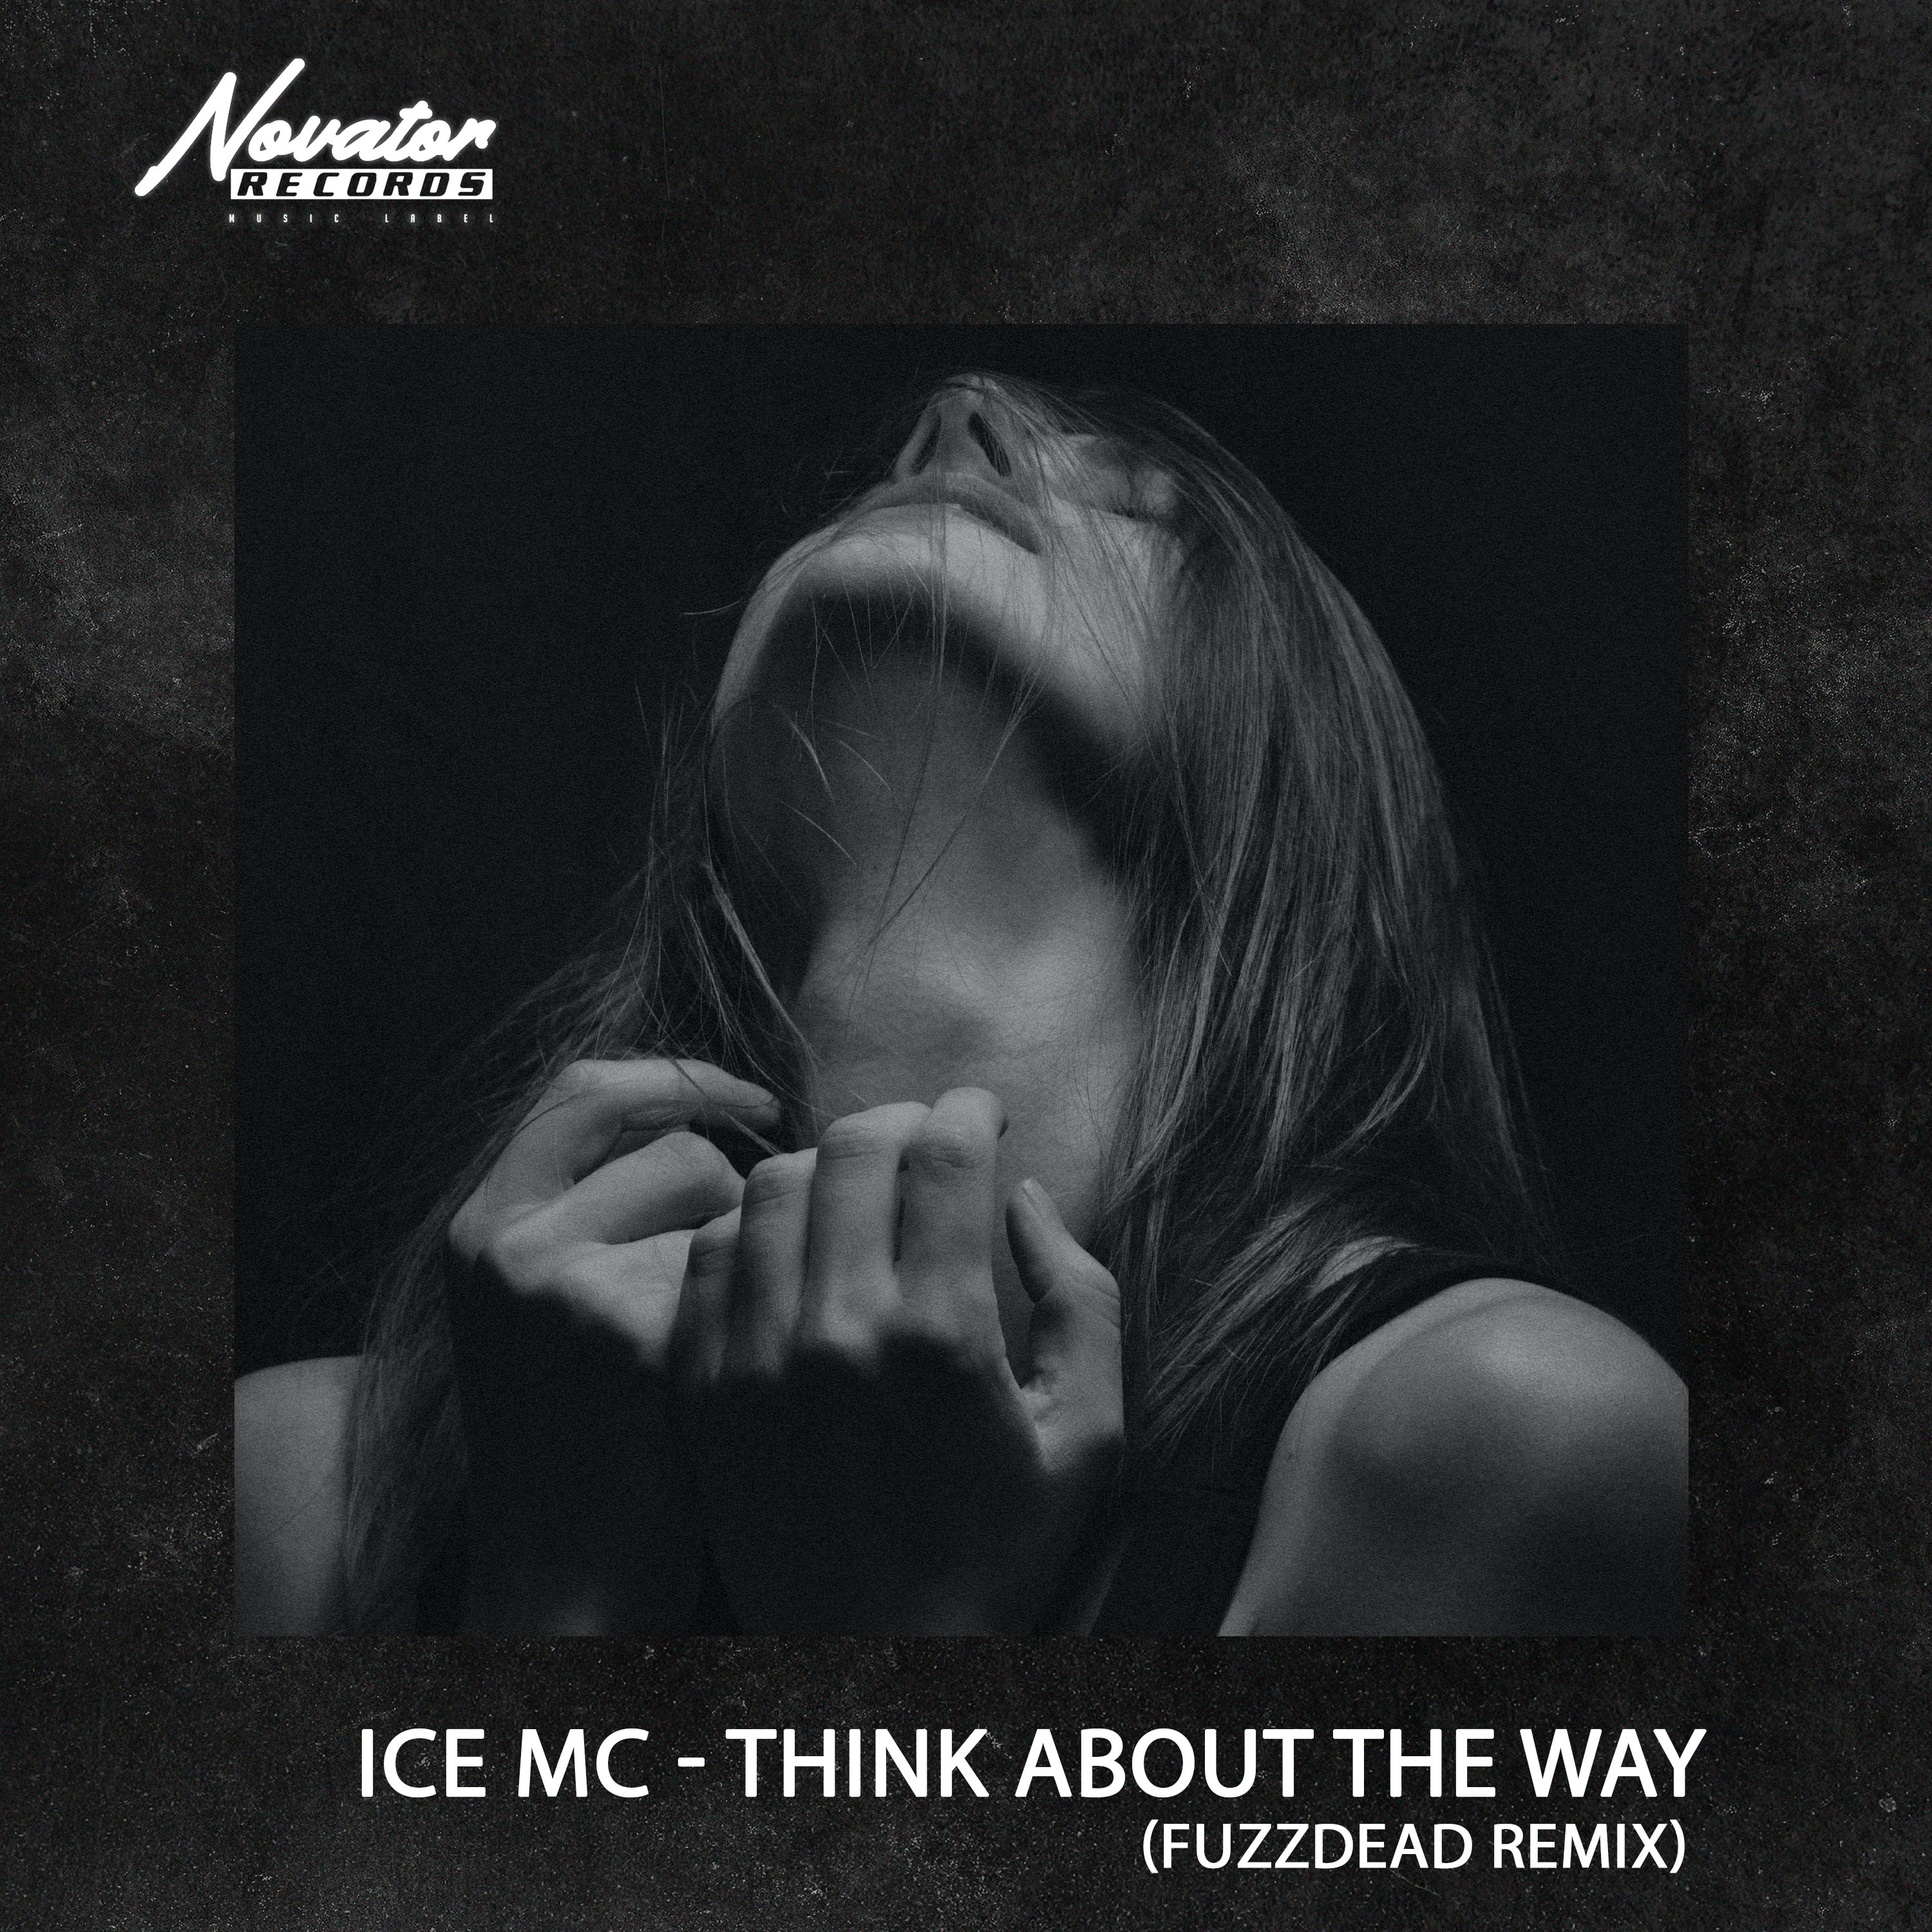 Ice mc think about the remix. Ice MC - think about the way обложка. Ice MS think about the. Айс МС thinking about the way. Ice MC think about the MC.